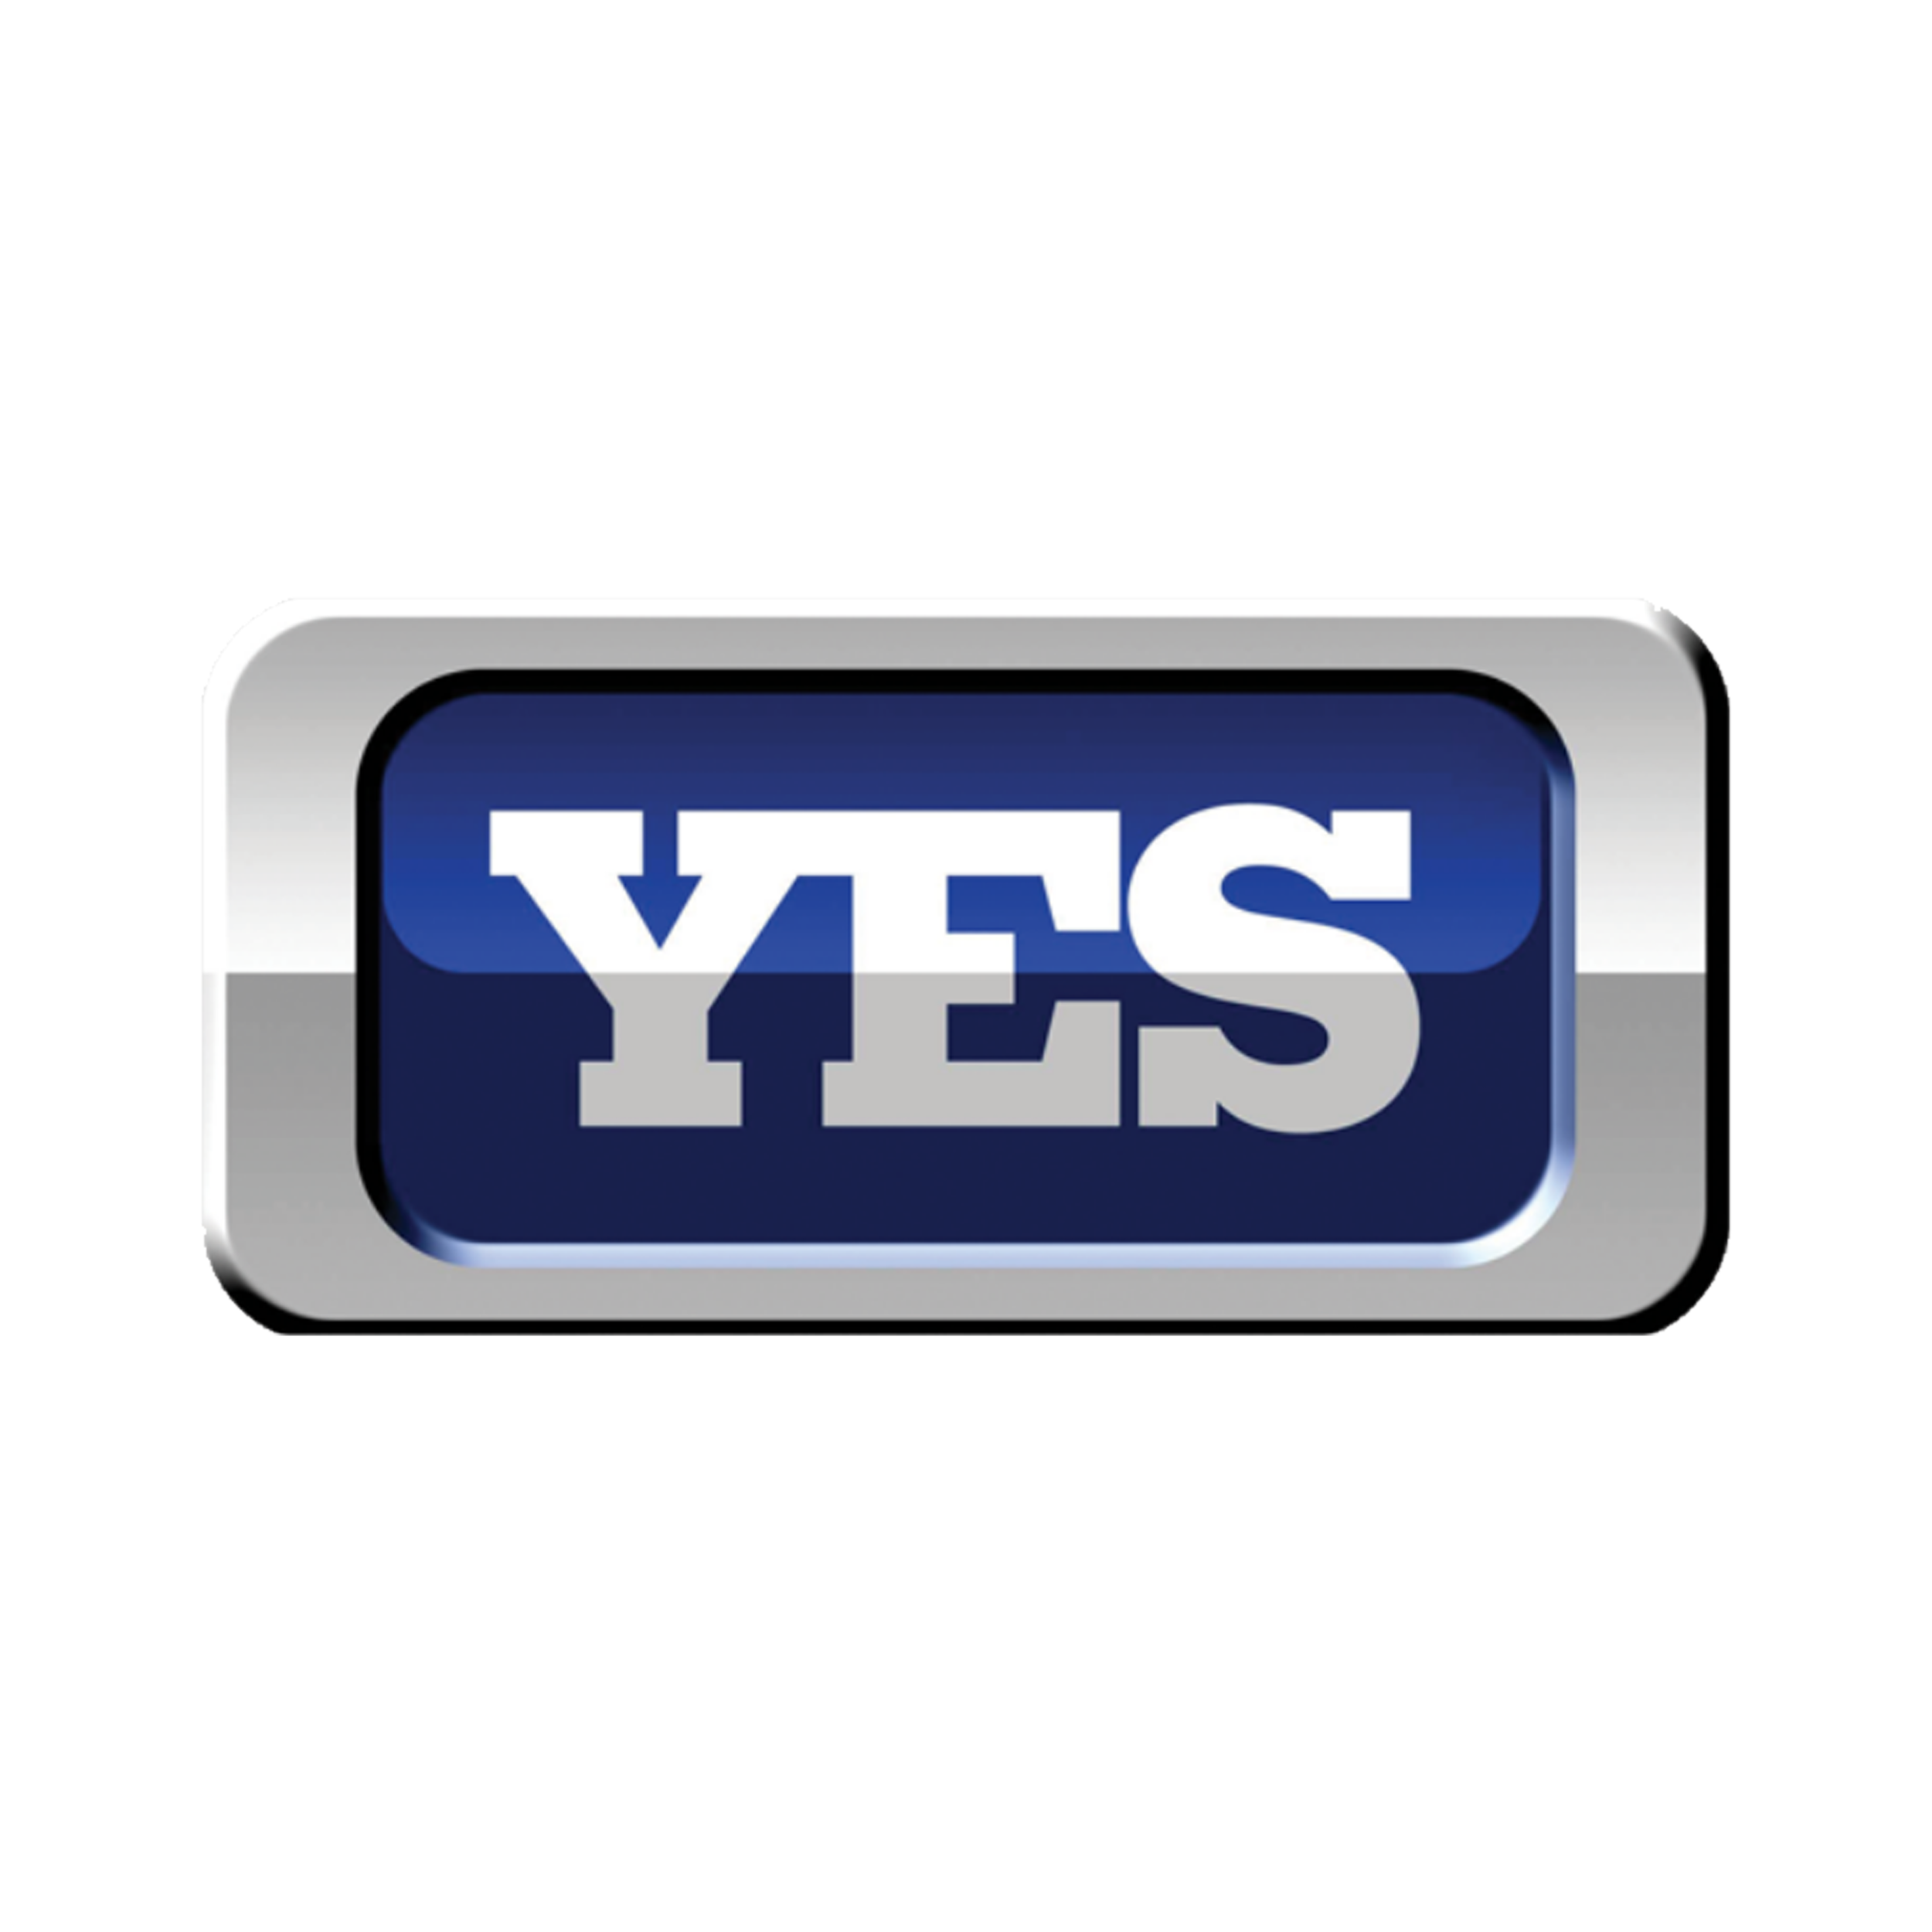 yes network logo.png